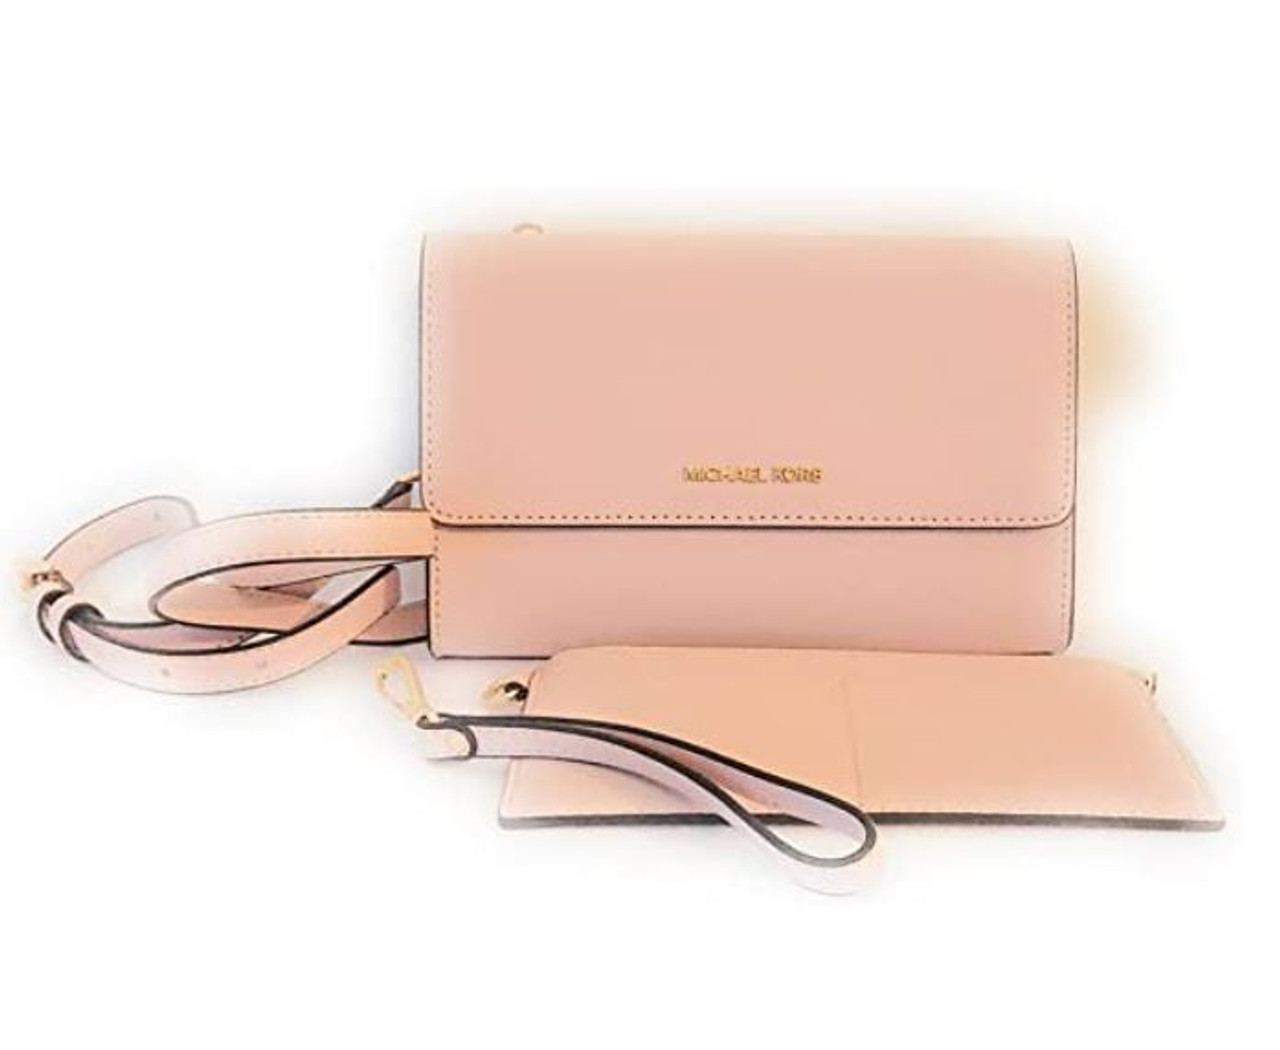 Michael Kors 3 In 1 Crossbody Bag With Removable Pouch (Powder Blush) -  AllGlitters